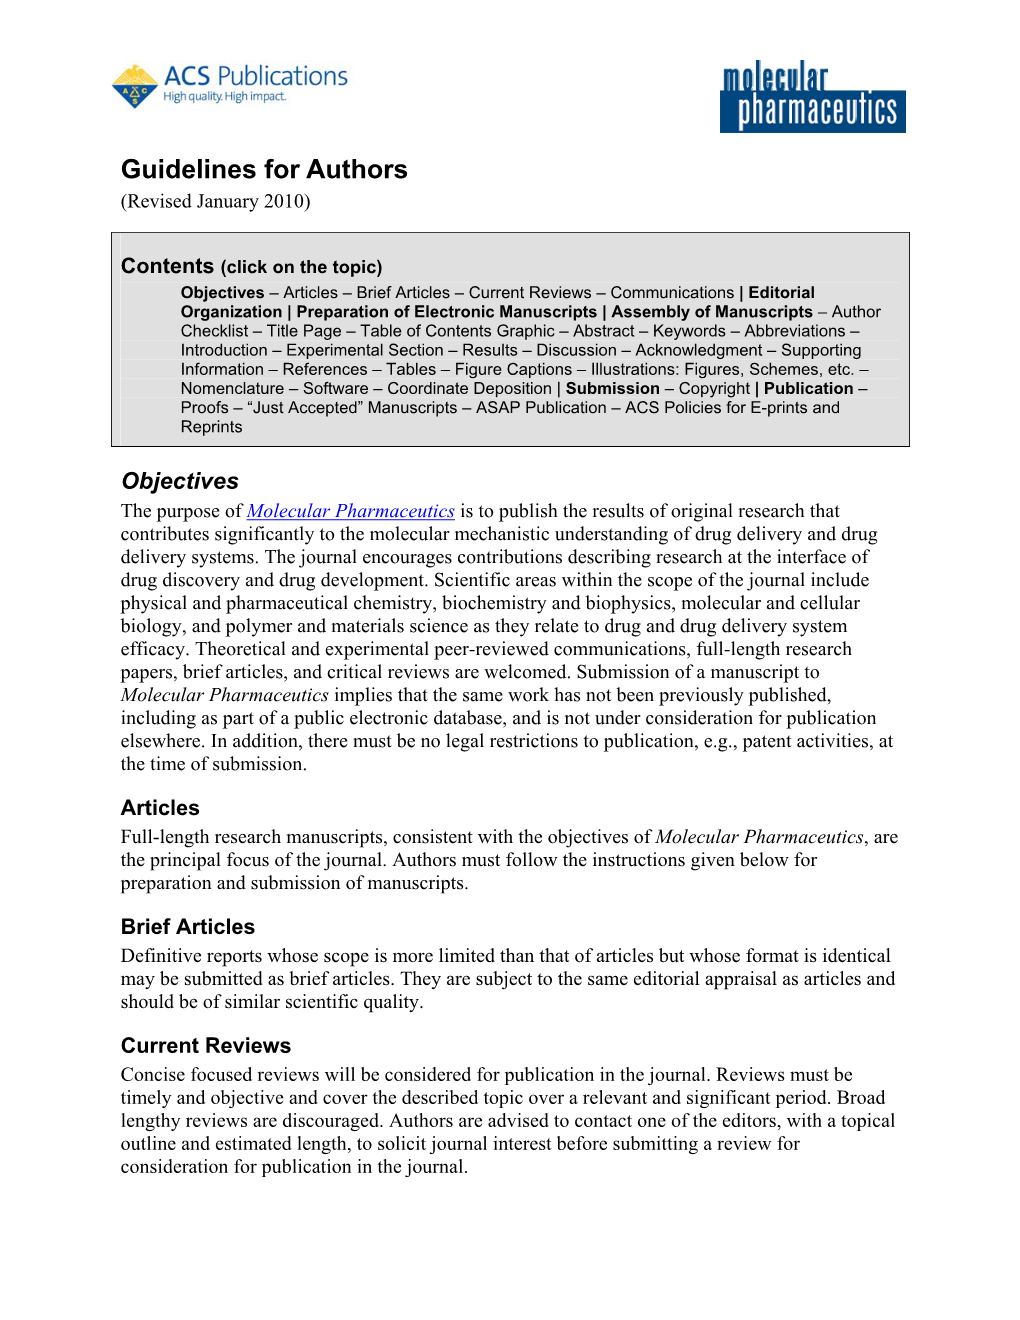 Guidelines for Authors (Revised January 2010)